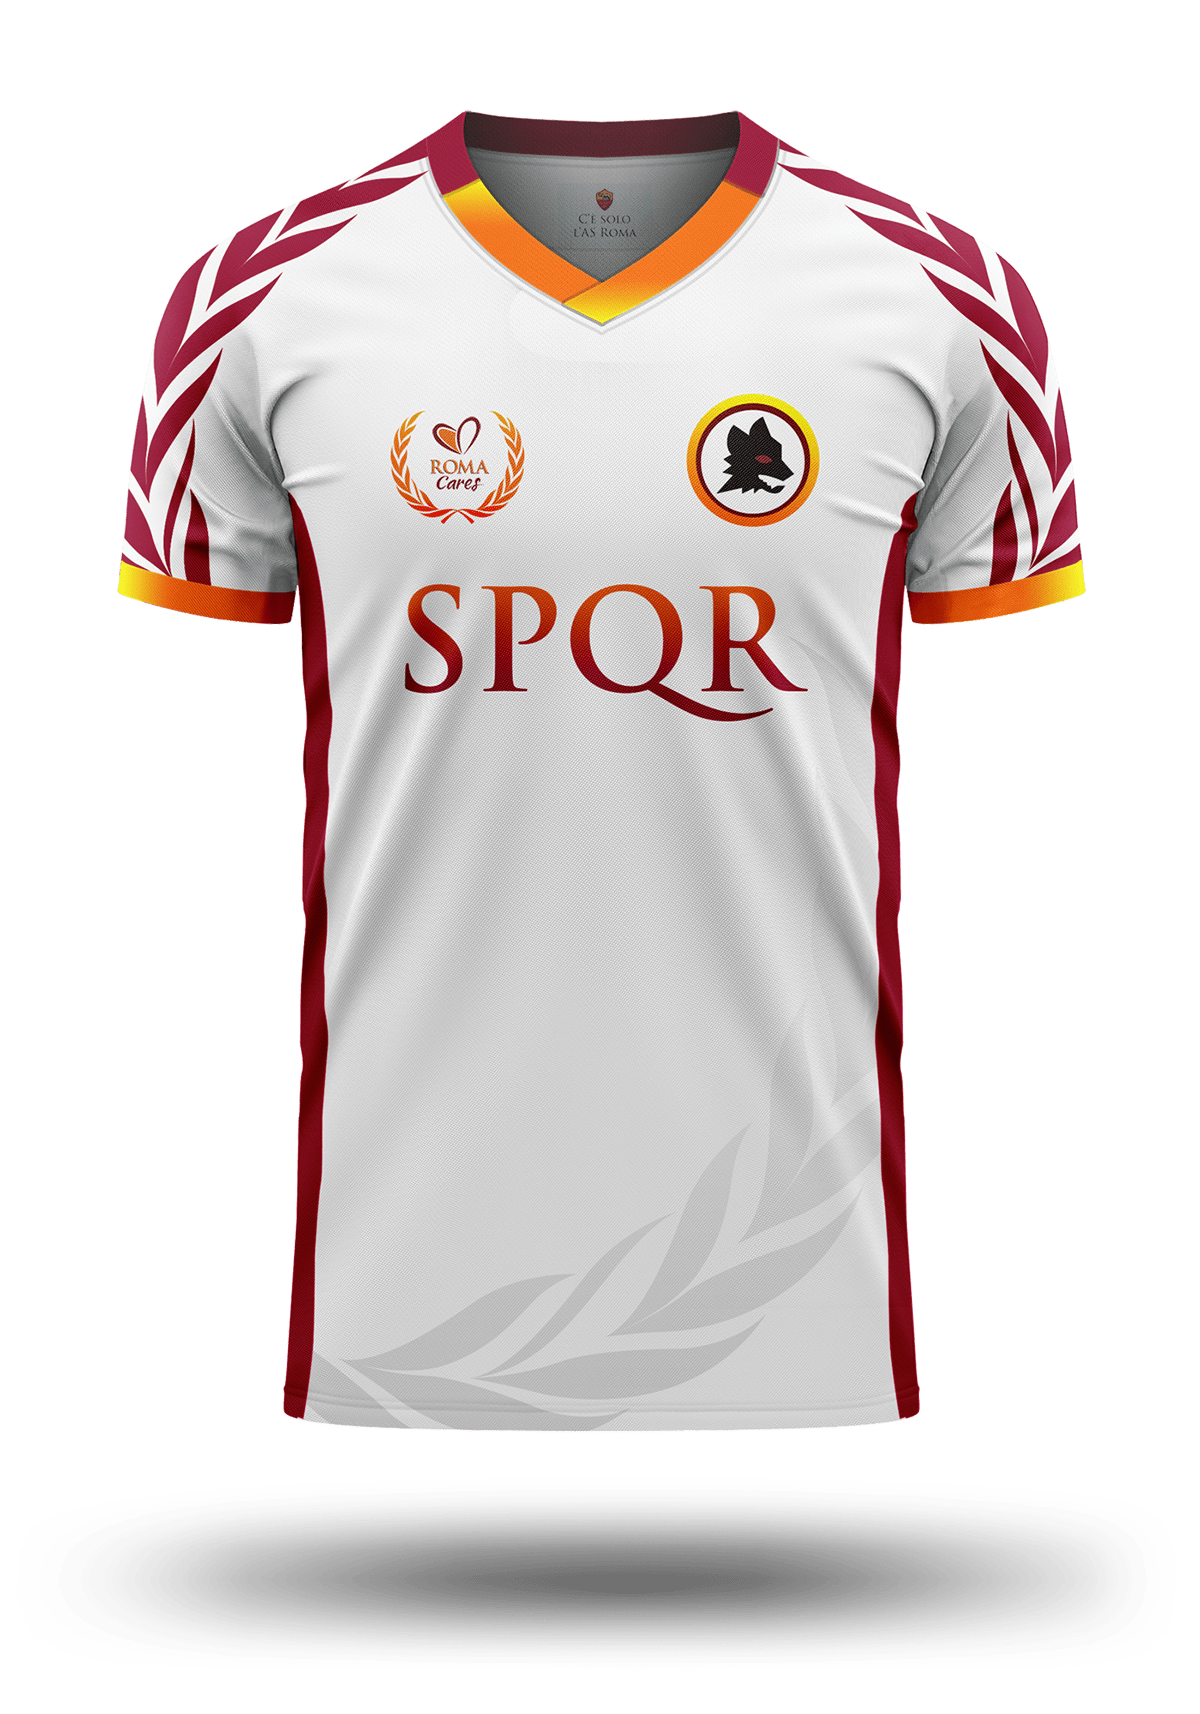 AS Roma Kit Concepts 2020 / 2019 /2018 on Behance